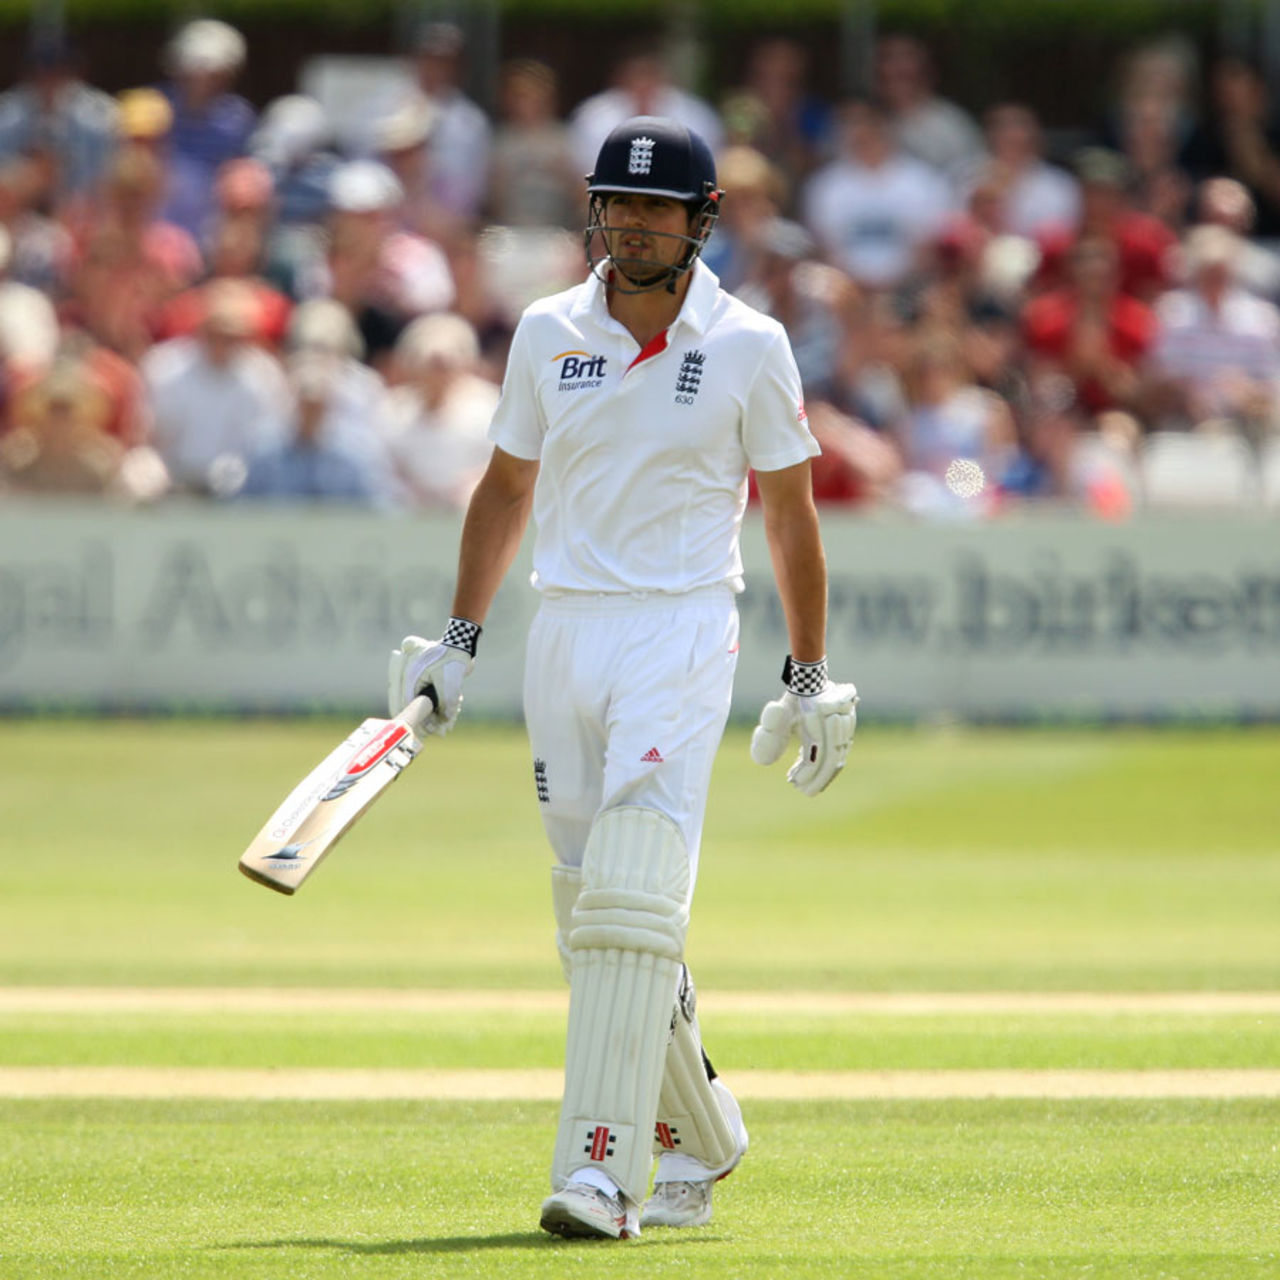 Alastair Cook was dismissed by his Essex team-mate Tymal Mills, Essex v England, 1st day, Chelmsford, June 30, 2013